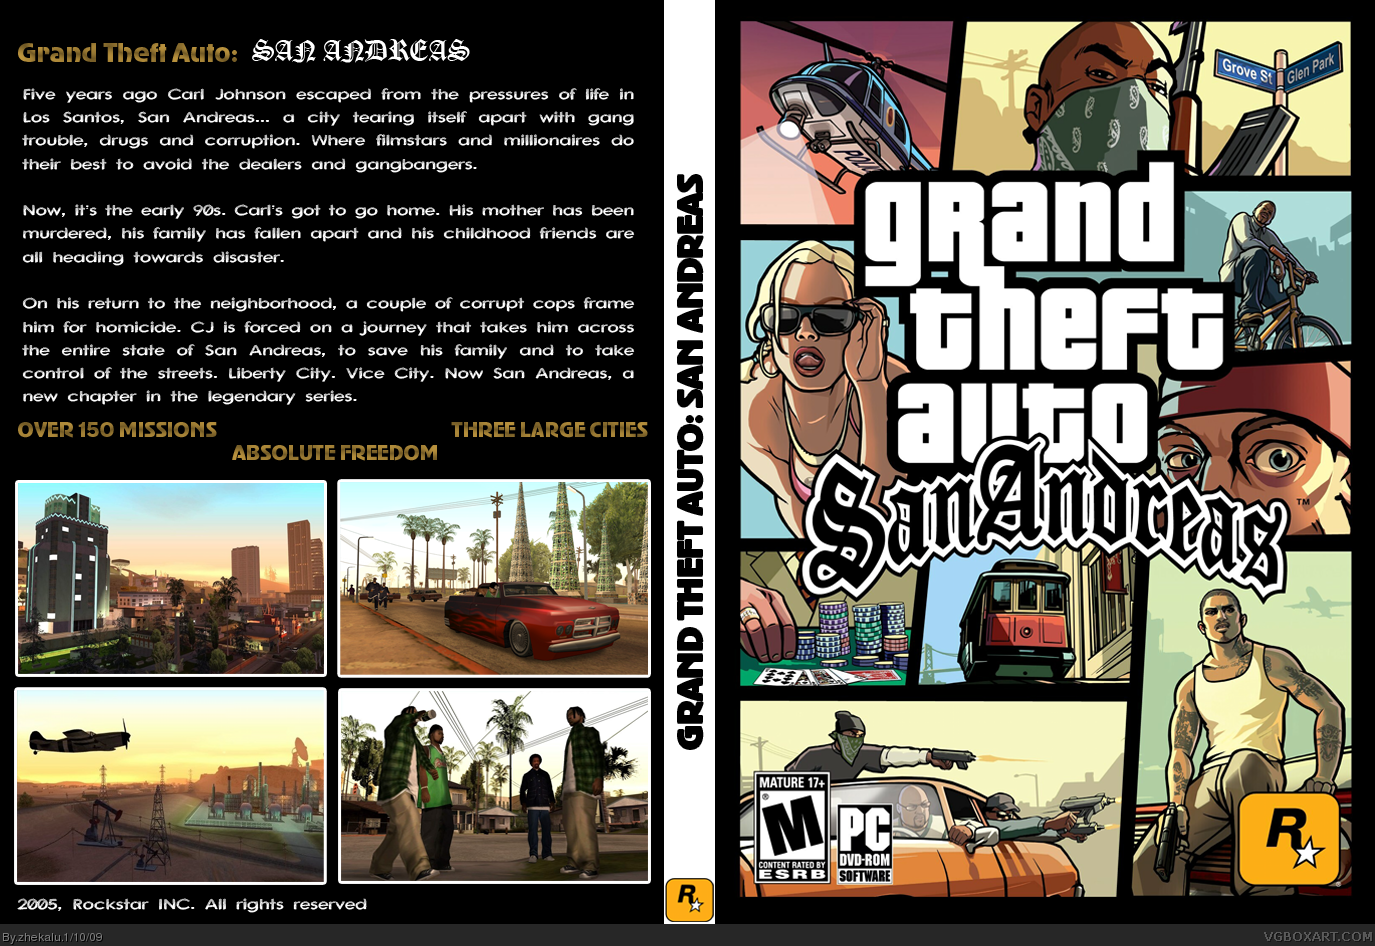 San andreas on steam фото 111